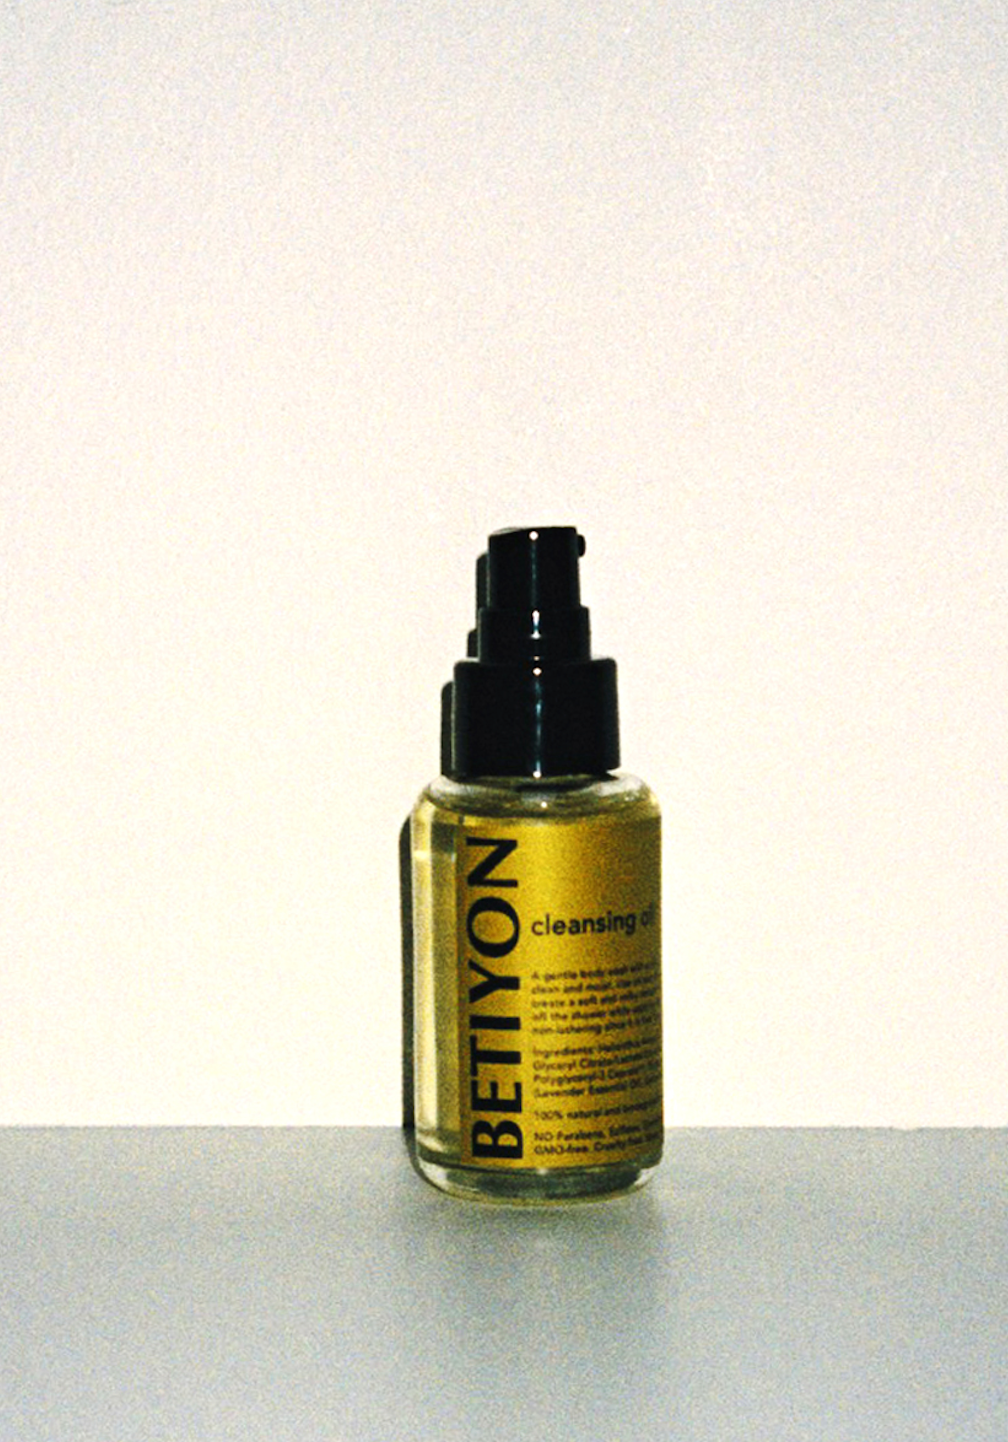 Cleansing Oil in travel size bottle from Betiyon